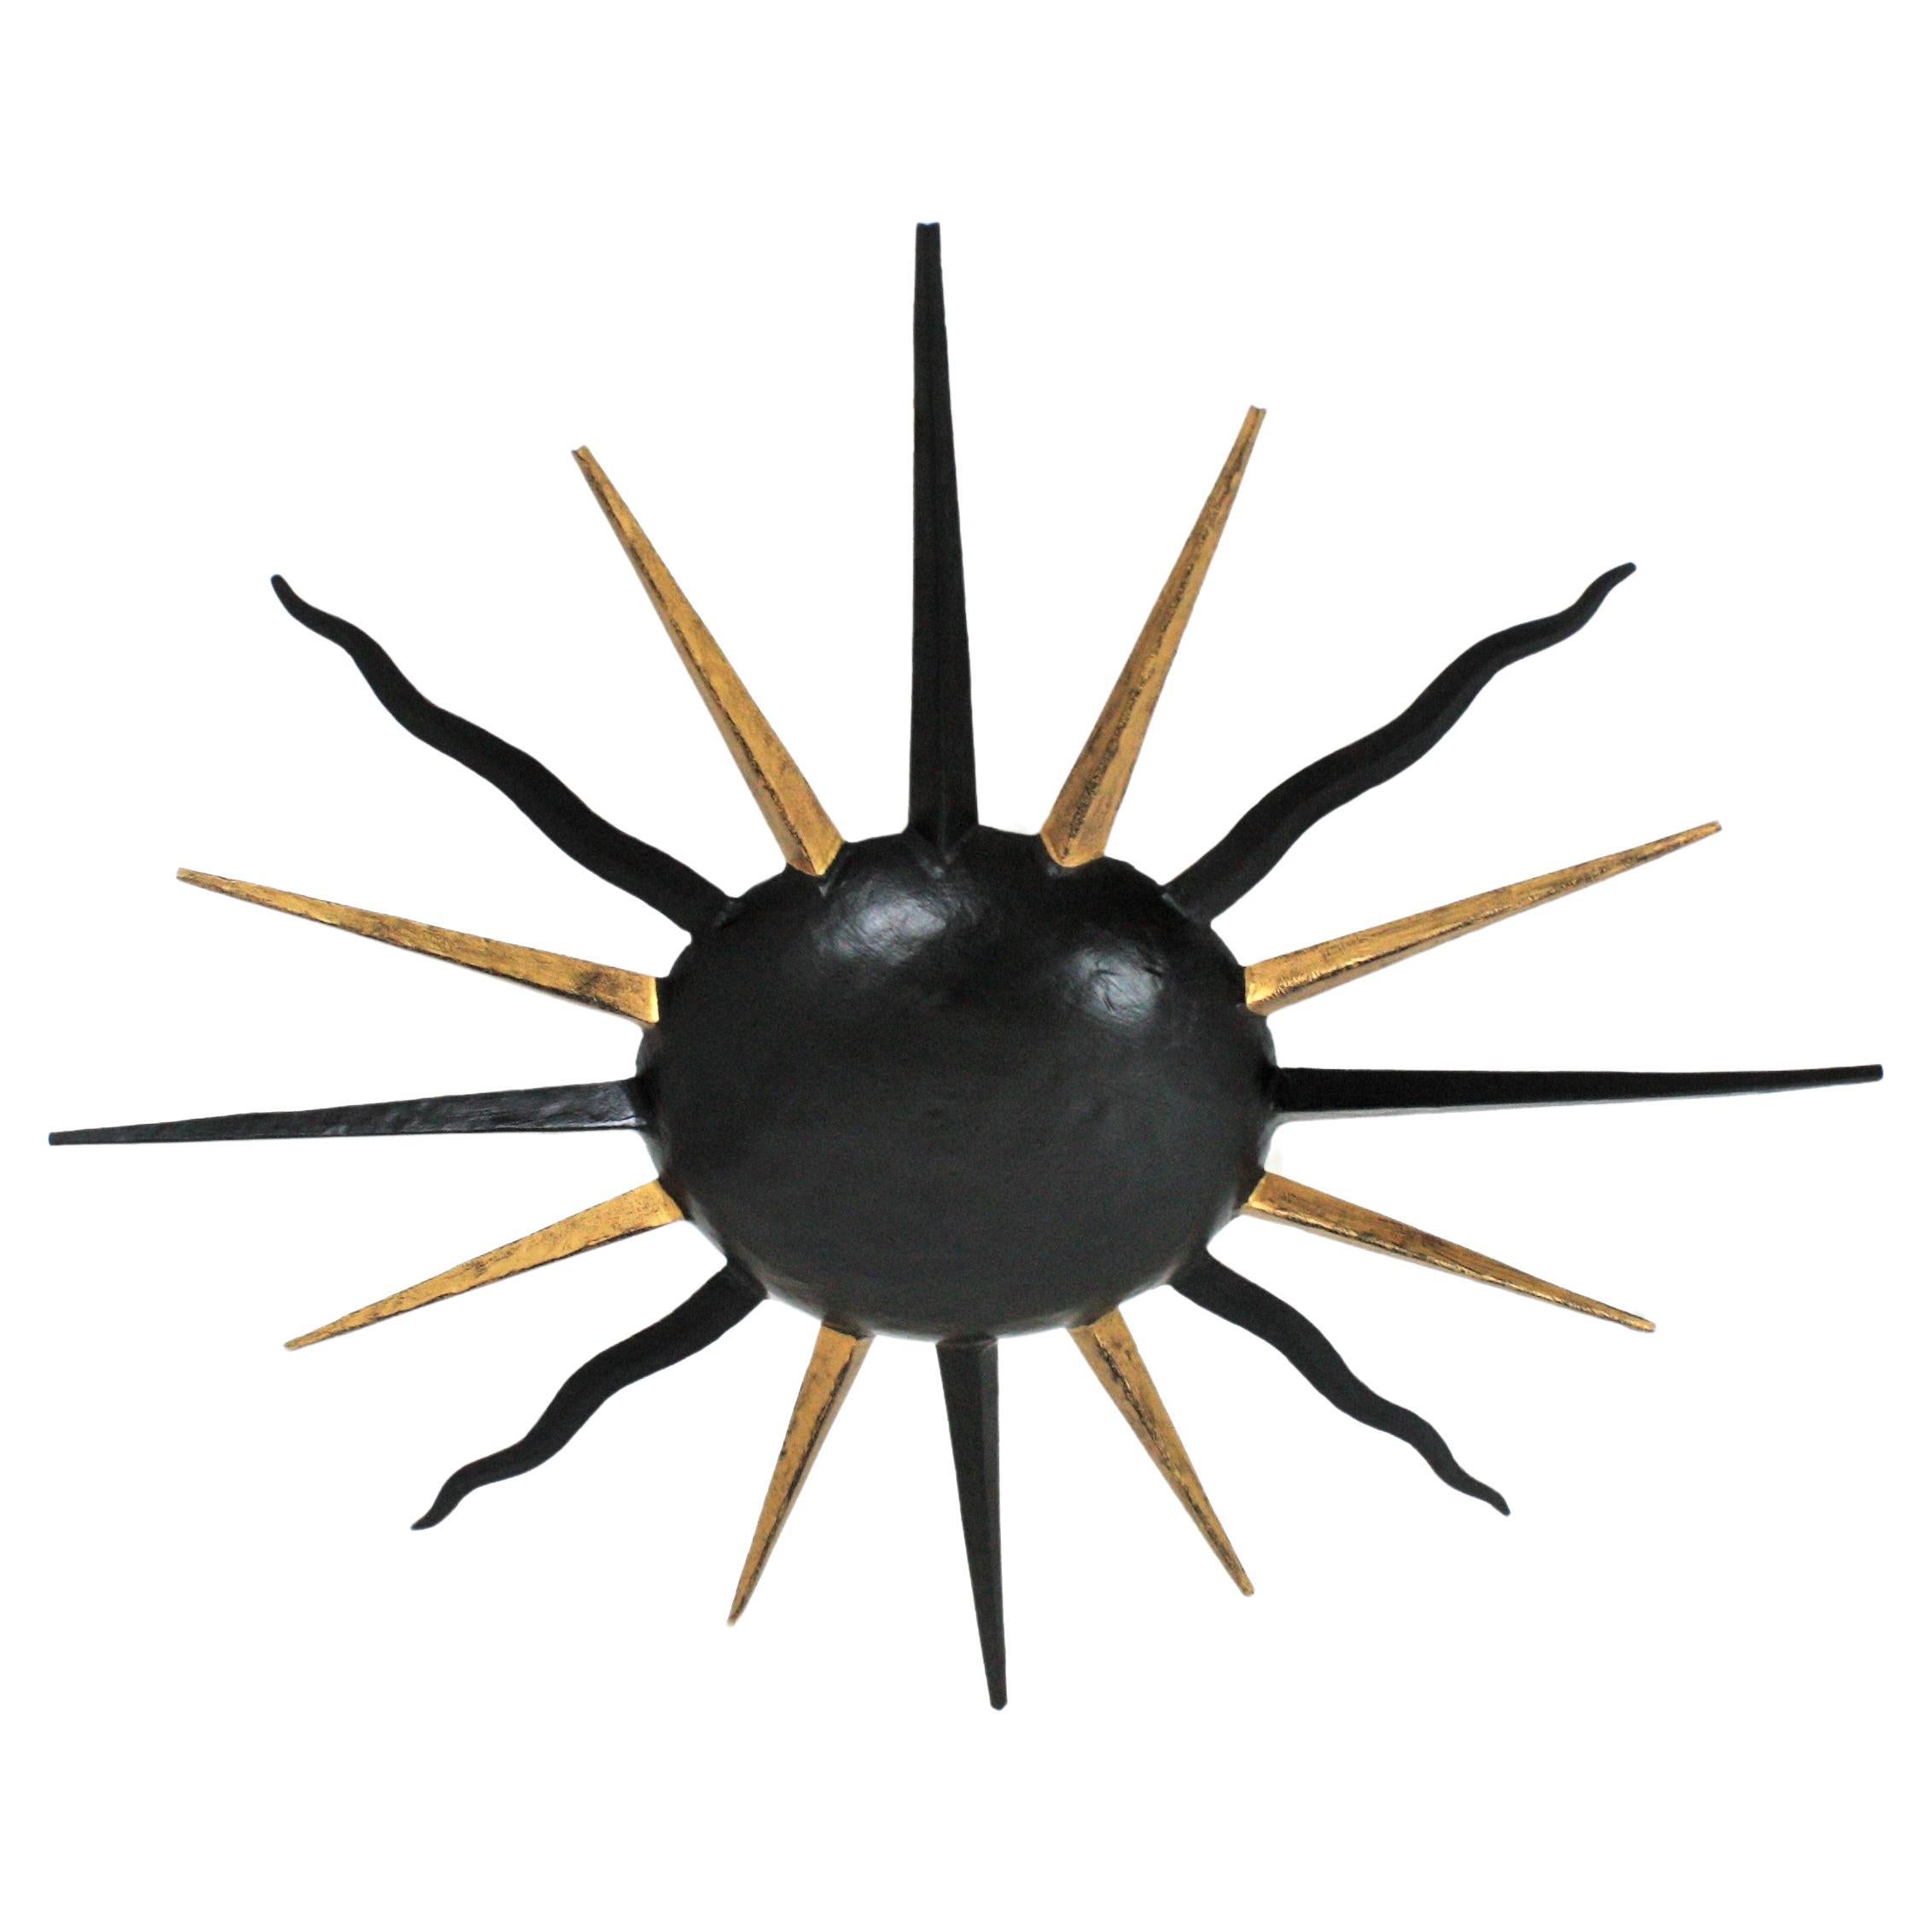 Outstanding hand forged gilt wrought iron large sunburst starburst flush mount in the manner of Gilbert Poillerat. France, 1940s.
This light fixture has an eye-catching starburst design. Entirely made by hand in wrought iron and finished combining